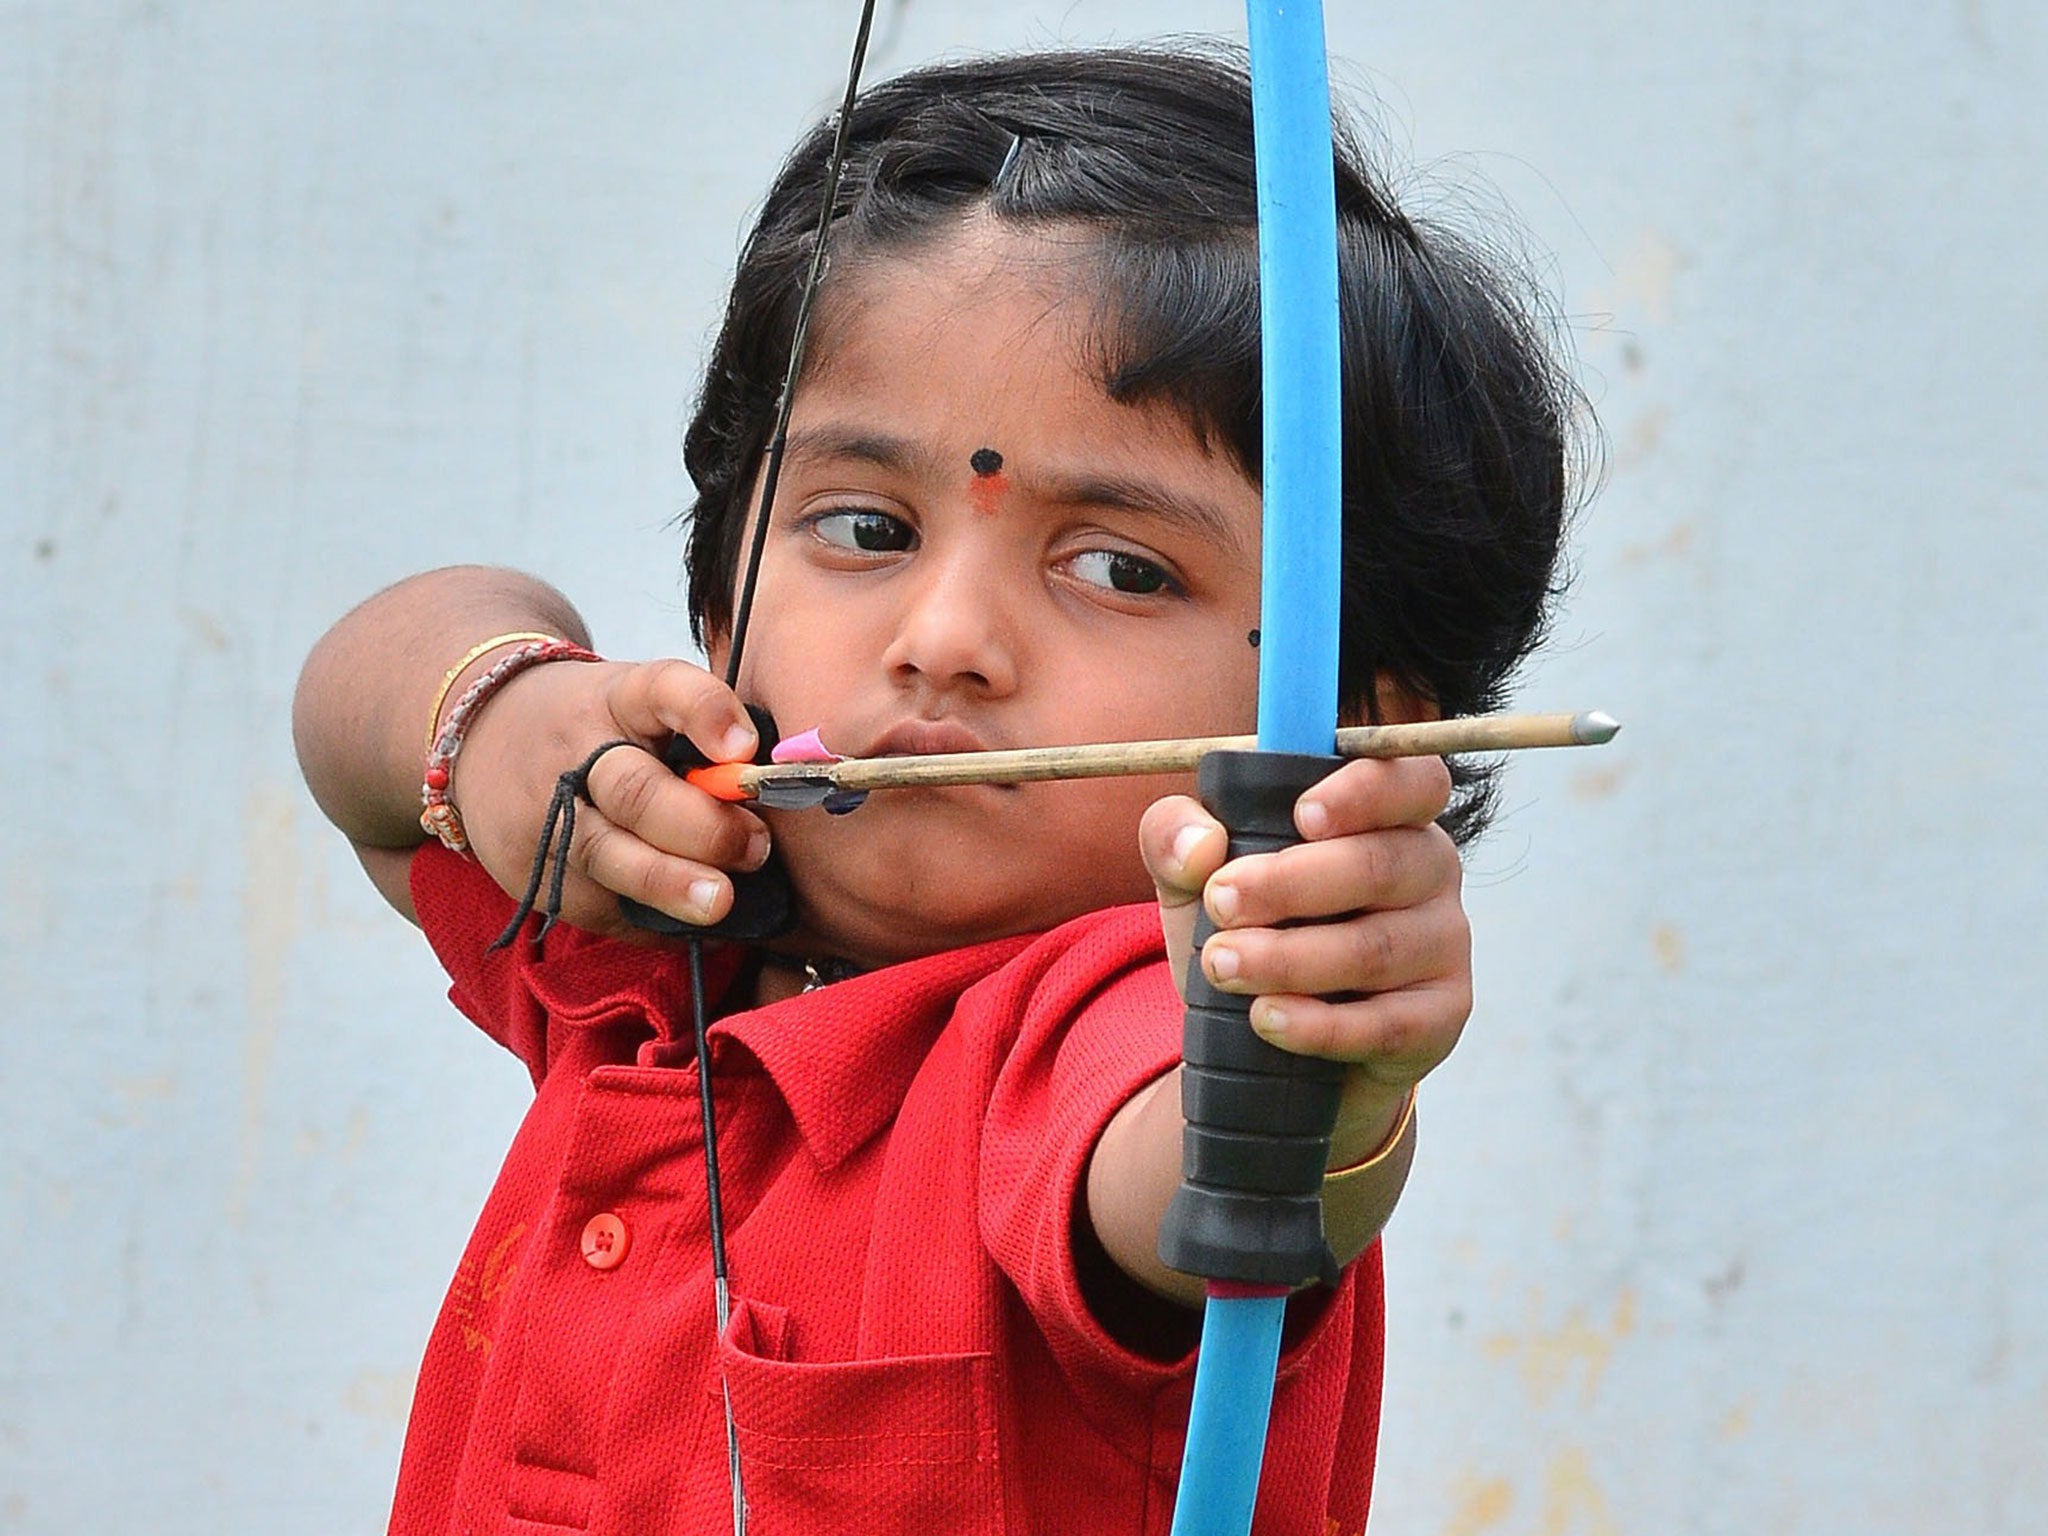 Two-year-old Indian archer Dolly Shivani Cherukuri takes aim as she sets a new record